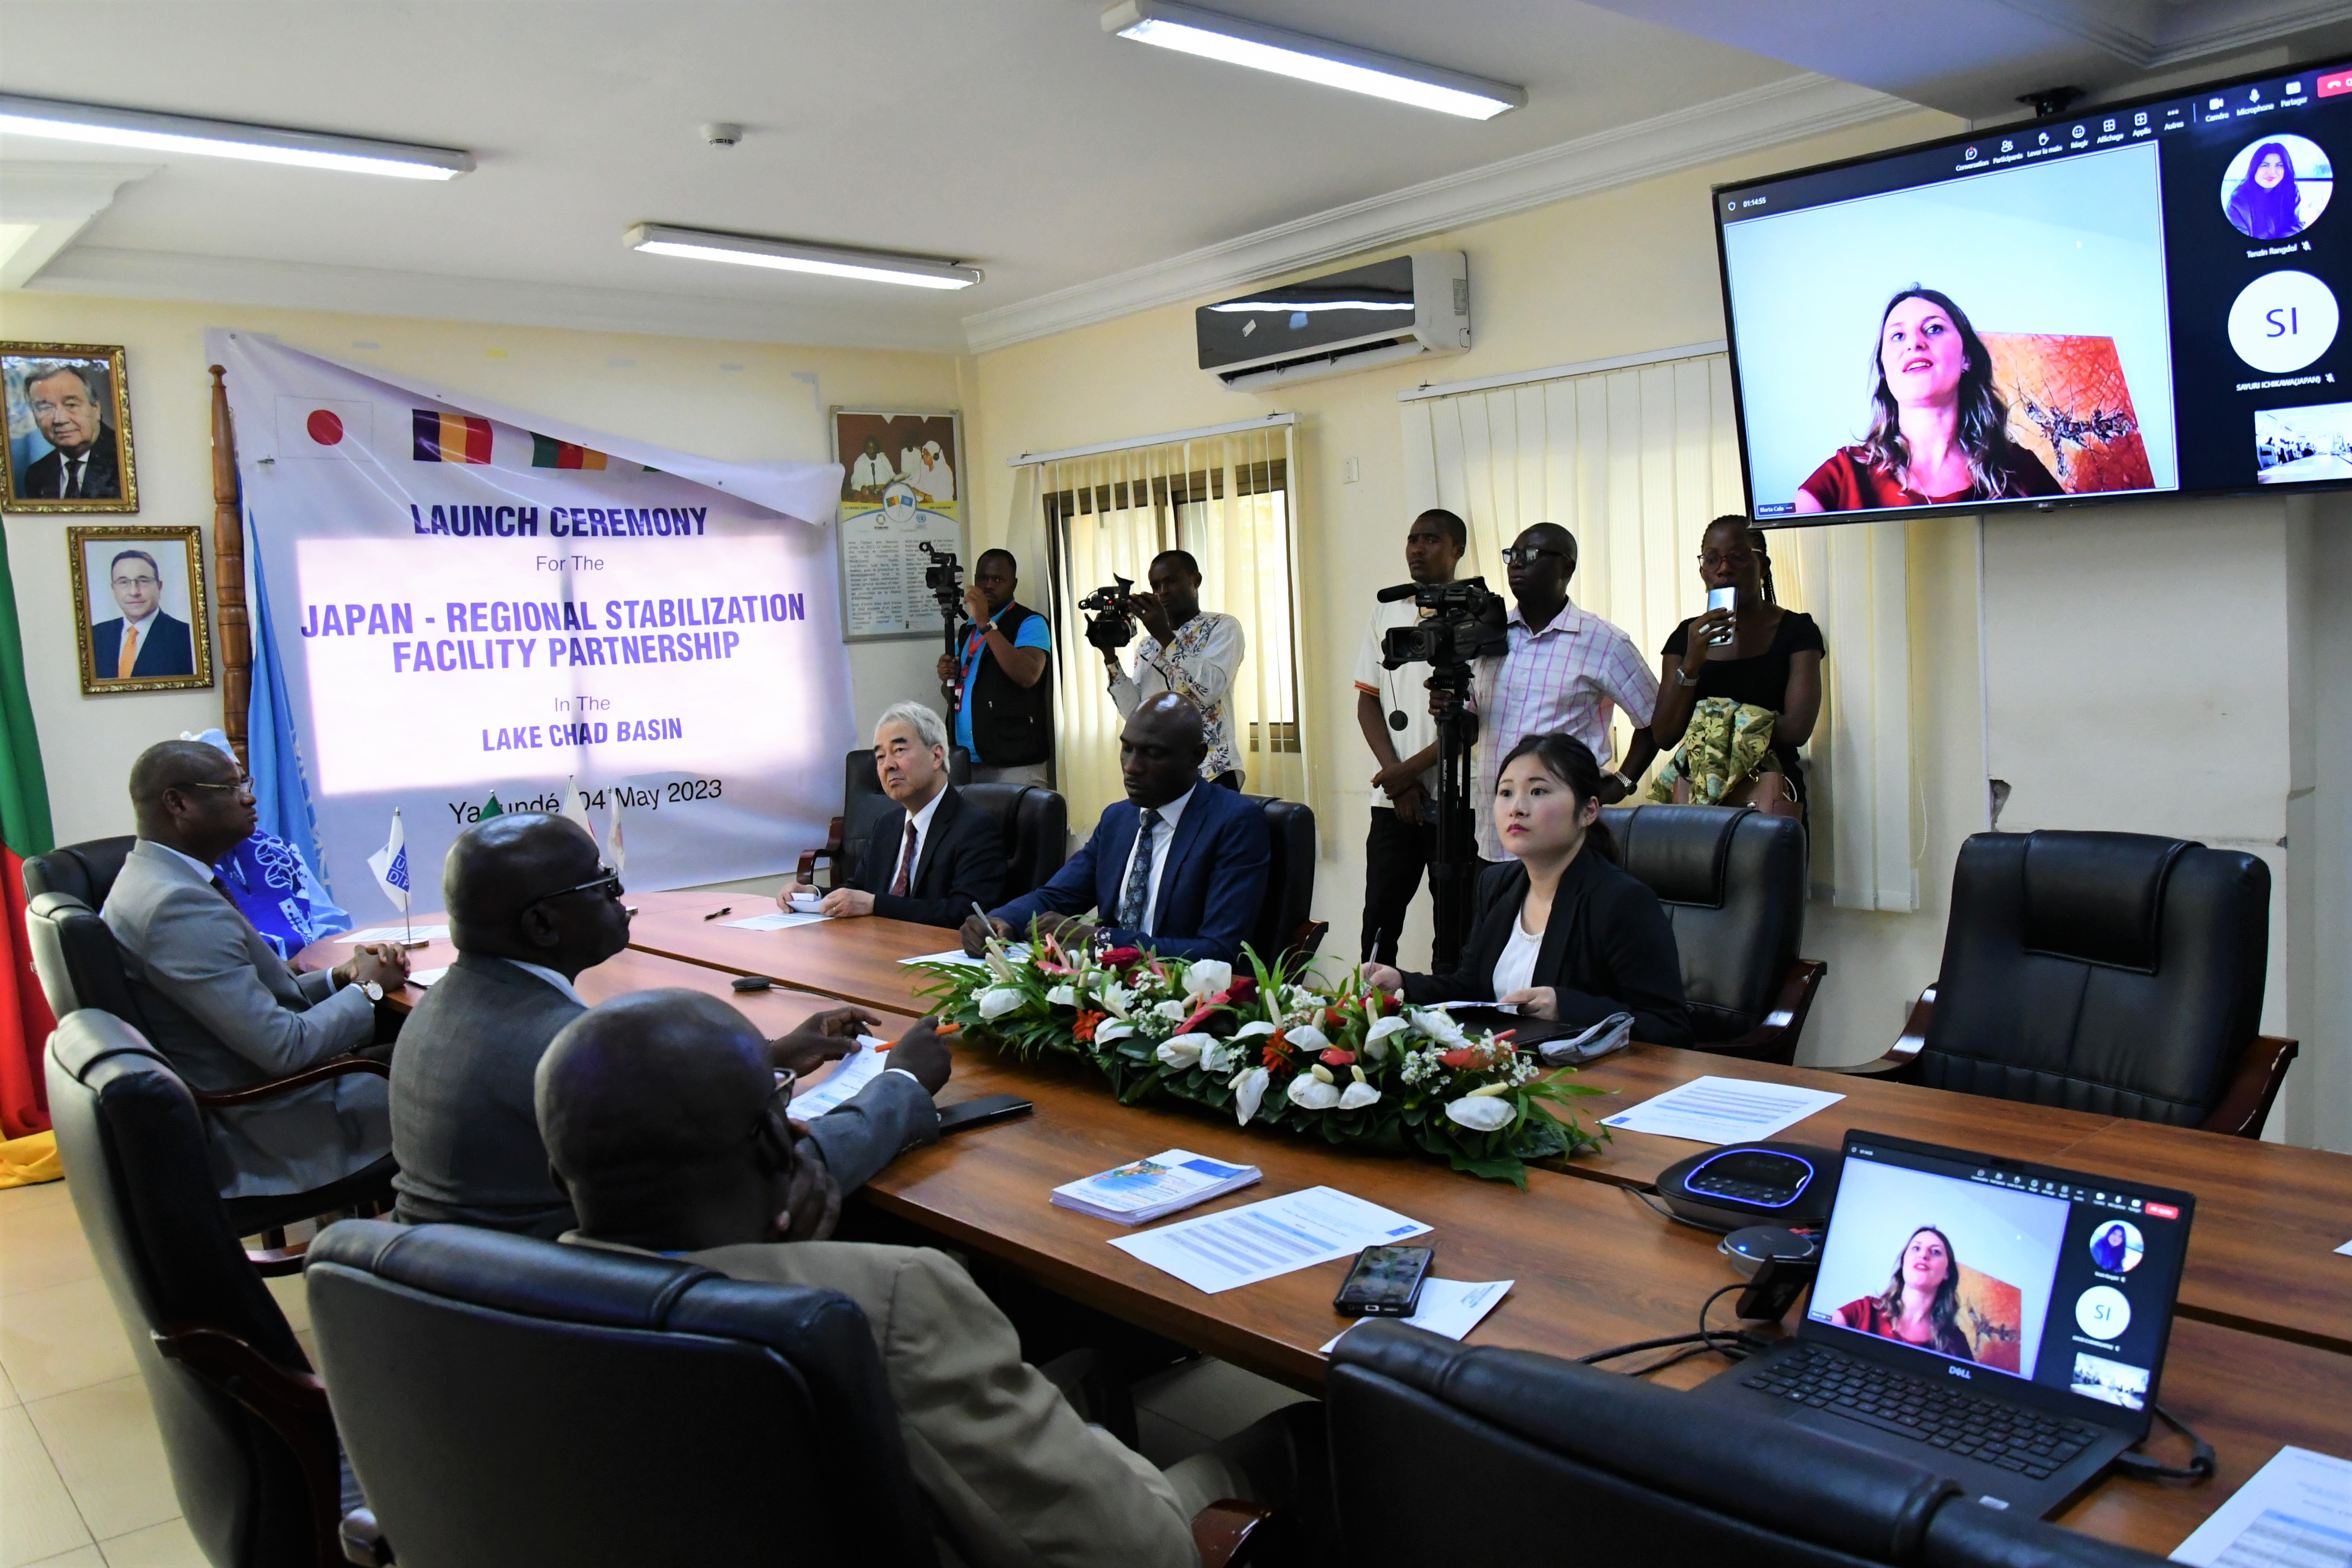 UNDP-CMR-A cross-section of personalities at the ceremony: Ambassador of Japan-TAKAOKA Nozomu, UNDP RR-Mr. Aliou Mamadou Dia, Head of the Regional Stabilization Facility-Ms. Blerta Cela, and the Governor of the Far-North Region-Mr. Midjiyawa Bakary, -2023